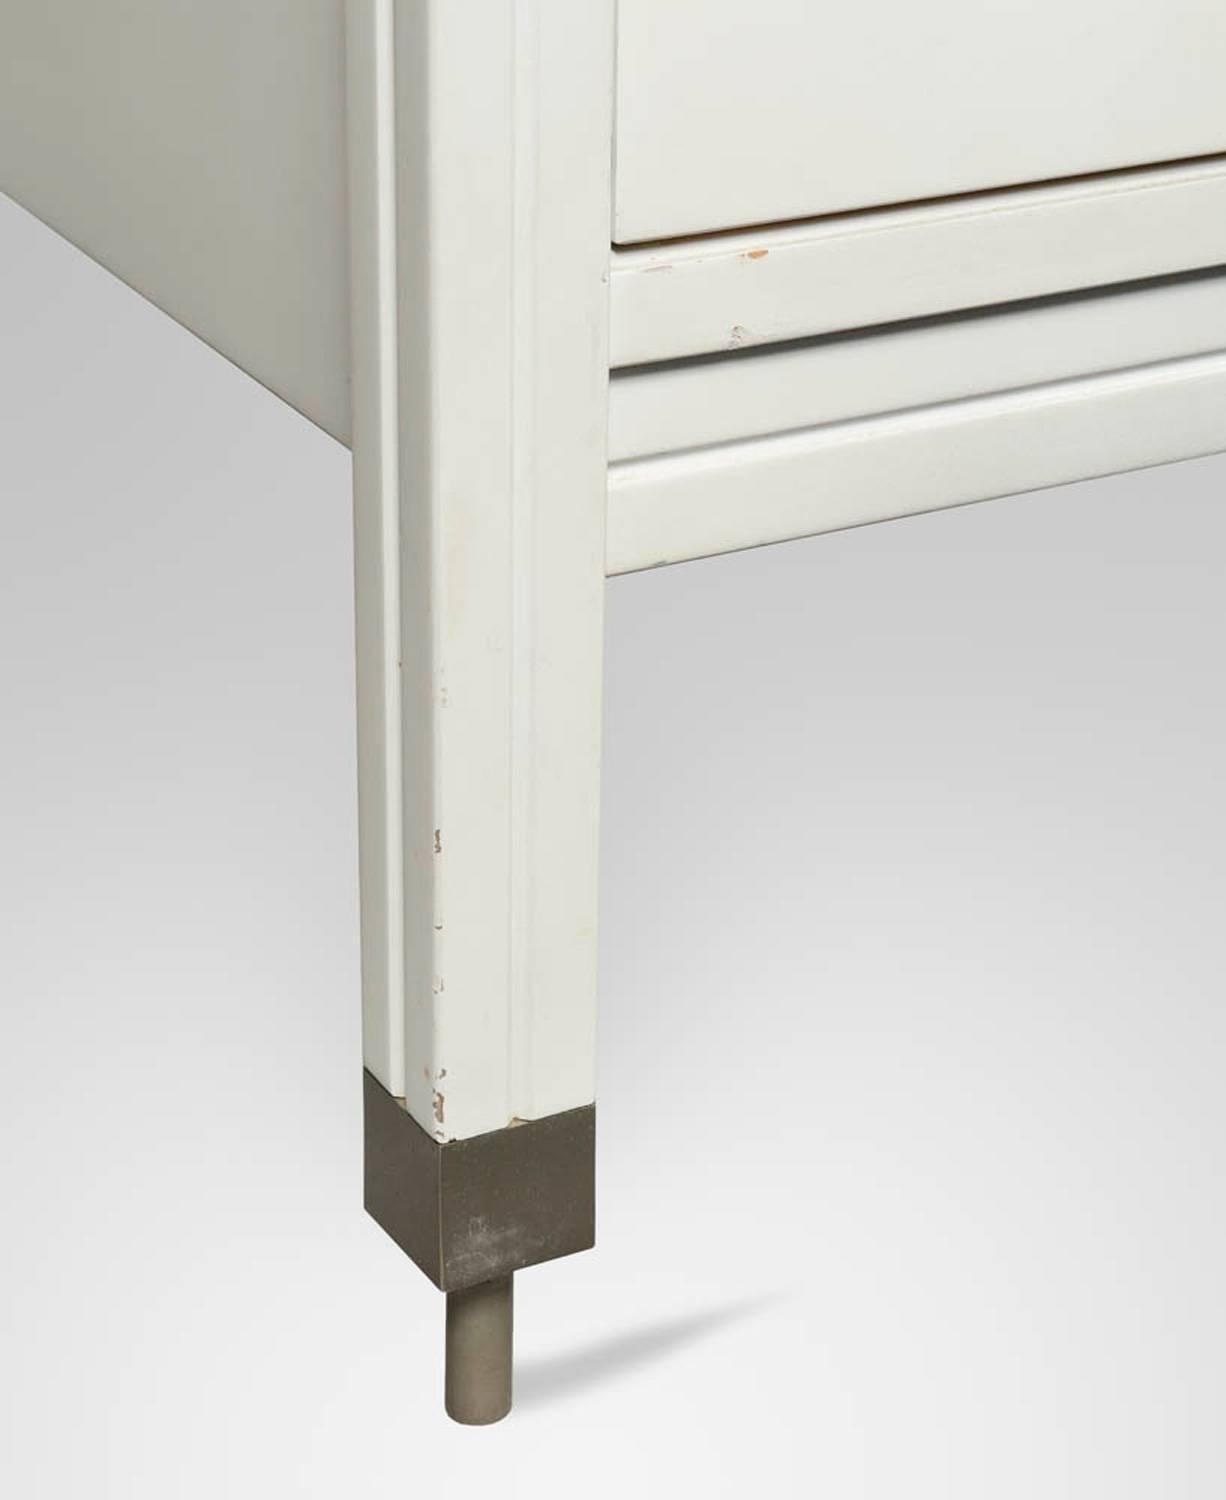 Elegant chest of three drawers by Carlo di Carli (Milan 1910-1999)
for Sornani Editor.

Model D154.
Italy, 1963-1964.

White lacquered.
A fixed top smoked glass, handles and feet in gilt brass. 

Measures: H 80 cm, L 144 cm, P 54